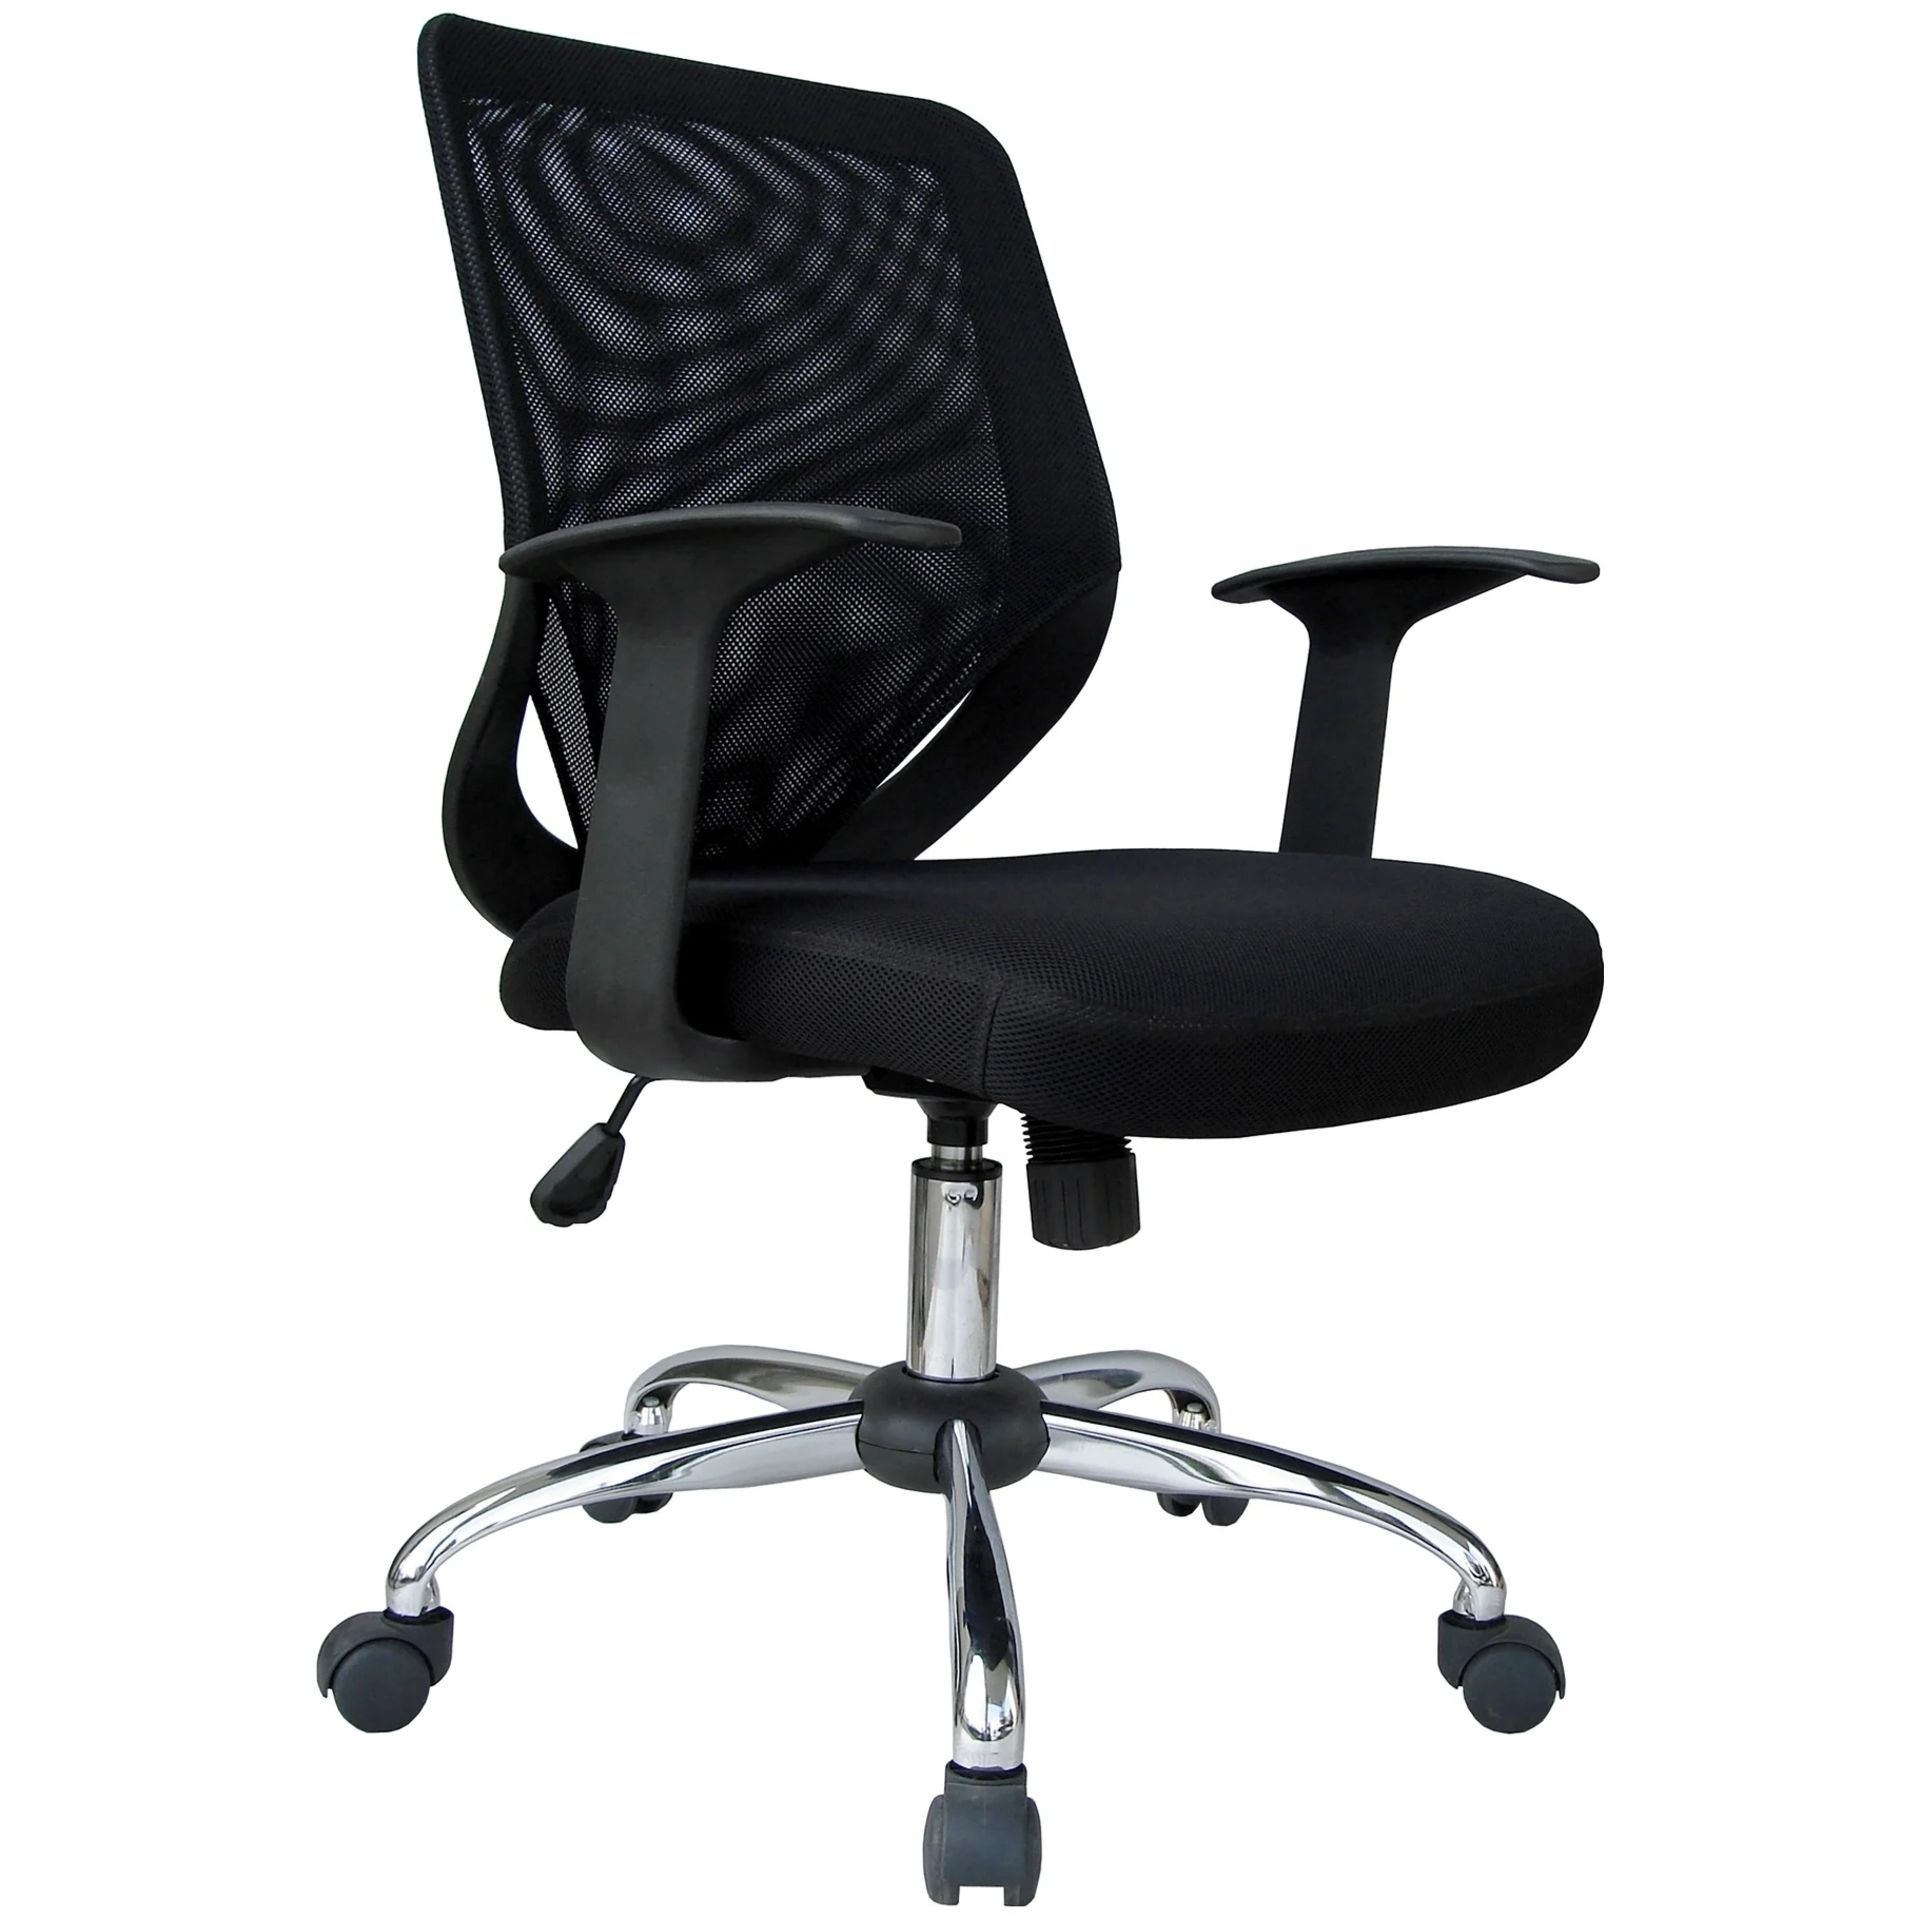 BRAND NEW OFFICE INTERIORS BLACK MESH SPINE CHAIR RRP £219 R9-6